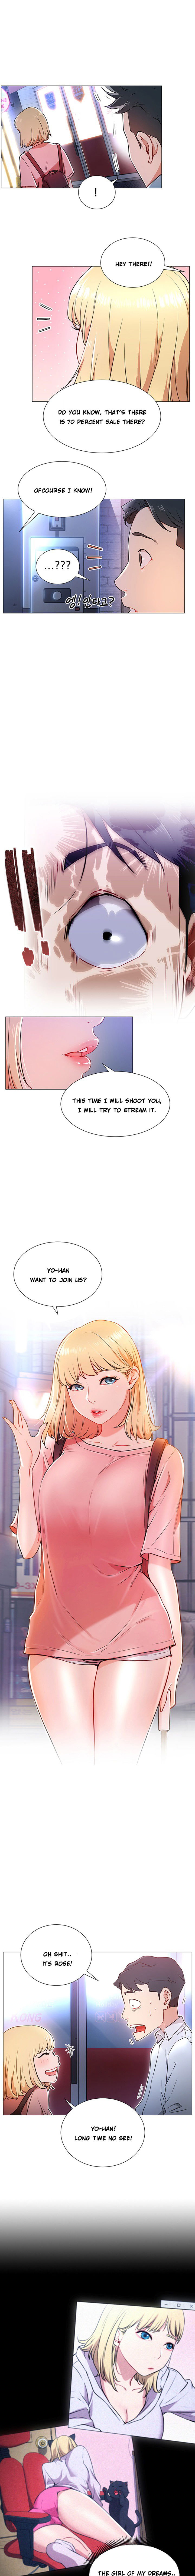 do-you-want-to-collab-chap-3-12